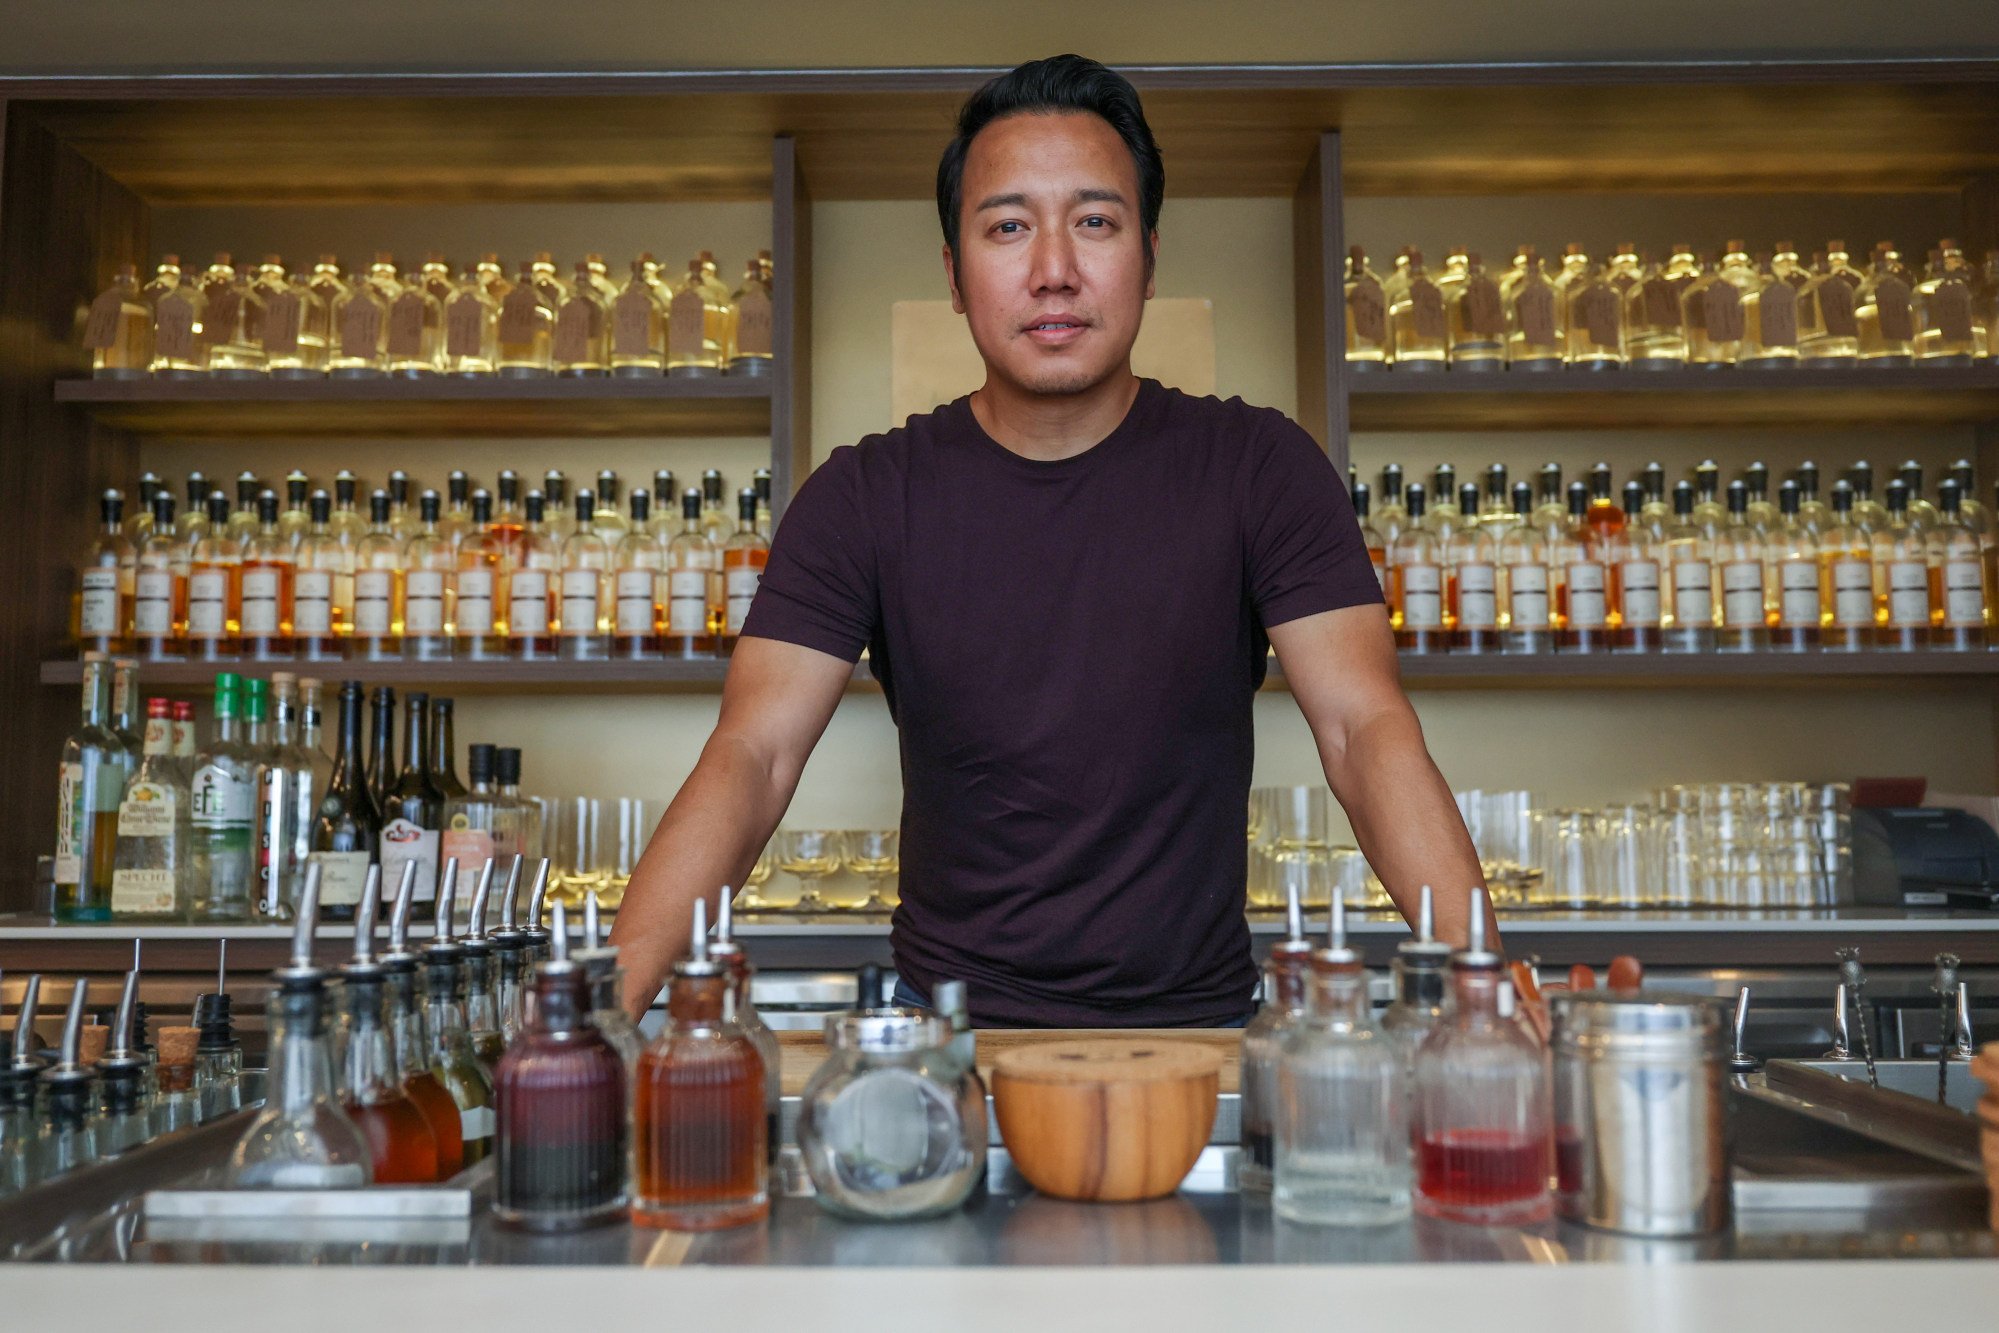 Alex Pun, founder of Orchard, a fruit spirit cocktail bar in SoHo, says customers have become more conscious of spending and their health. Photo: Edmond So